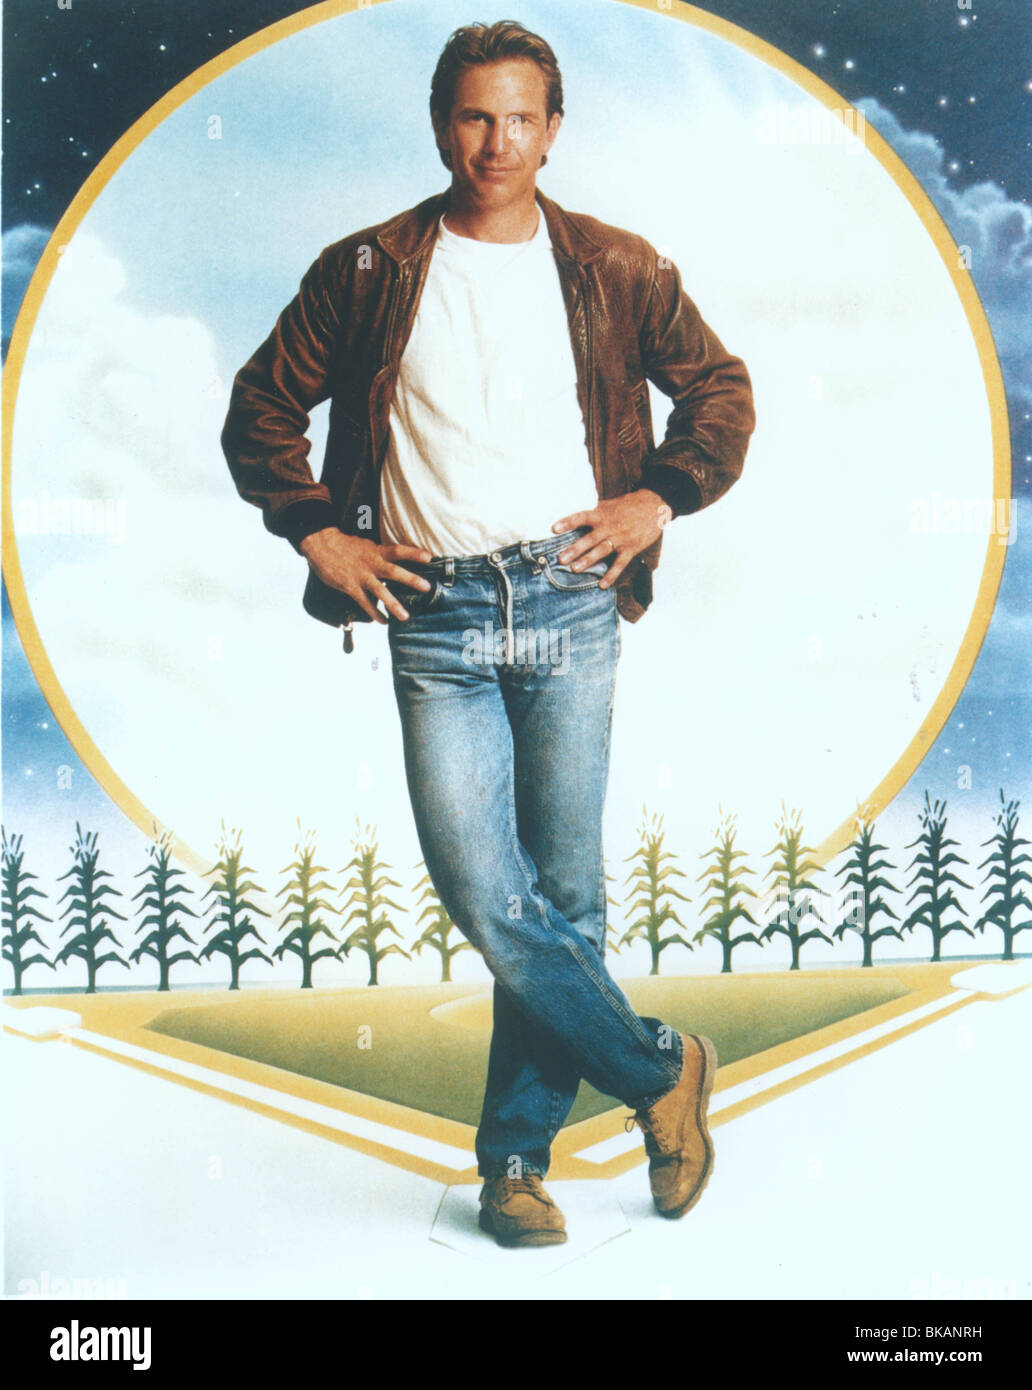 FIELD OF DREAMS (1989) KEVIN COSTNER FOD 001CP MOVIESTORE COLLECTION LTD Foto Stock